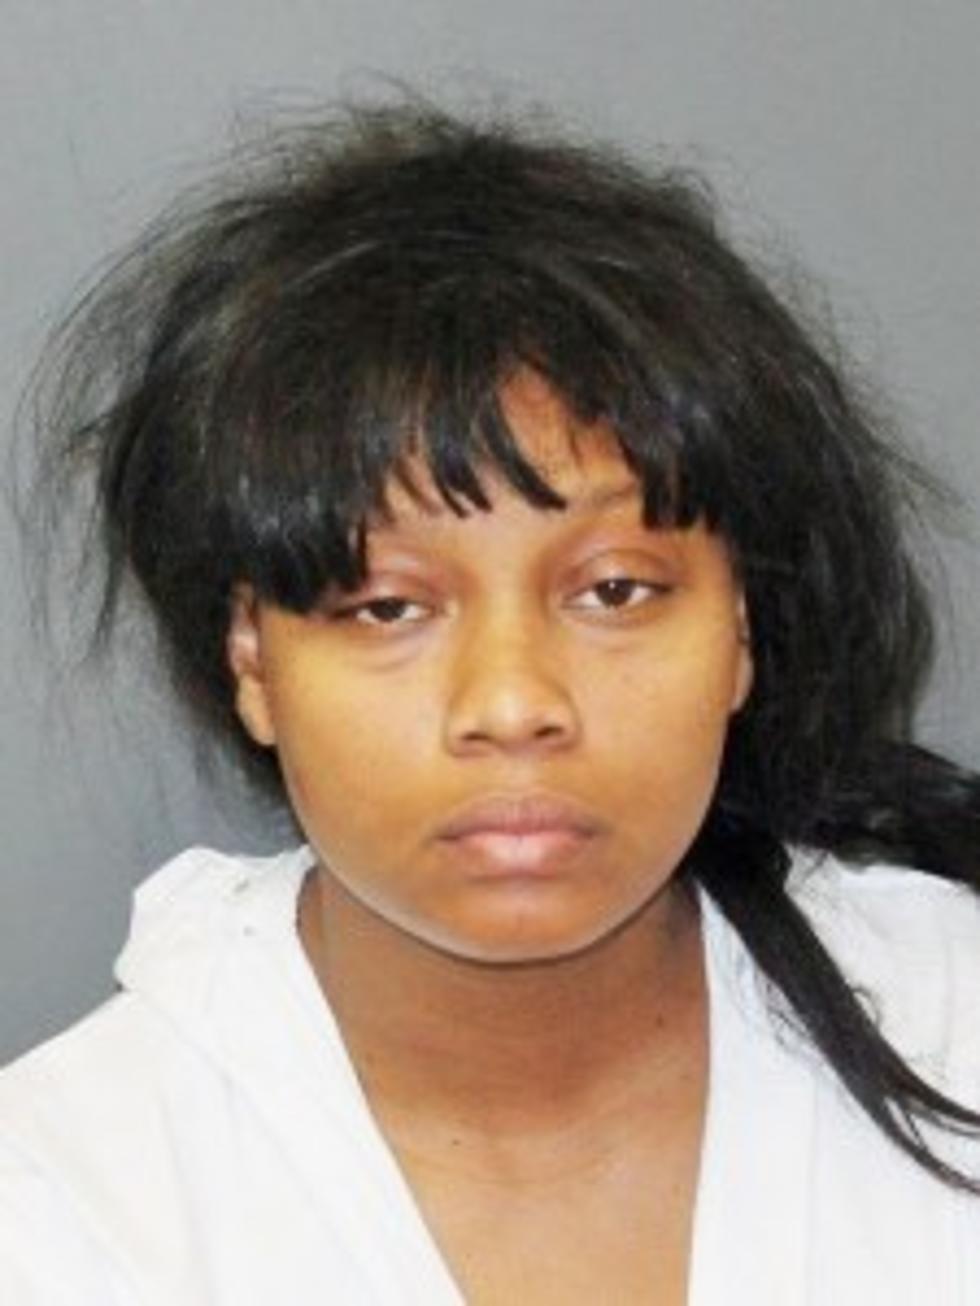 Asbury Park Woman Faces 20 Years In Prison For Fatal Stabbing